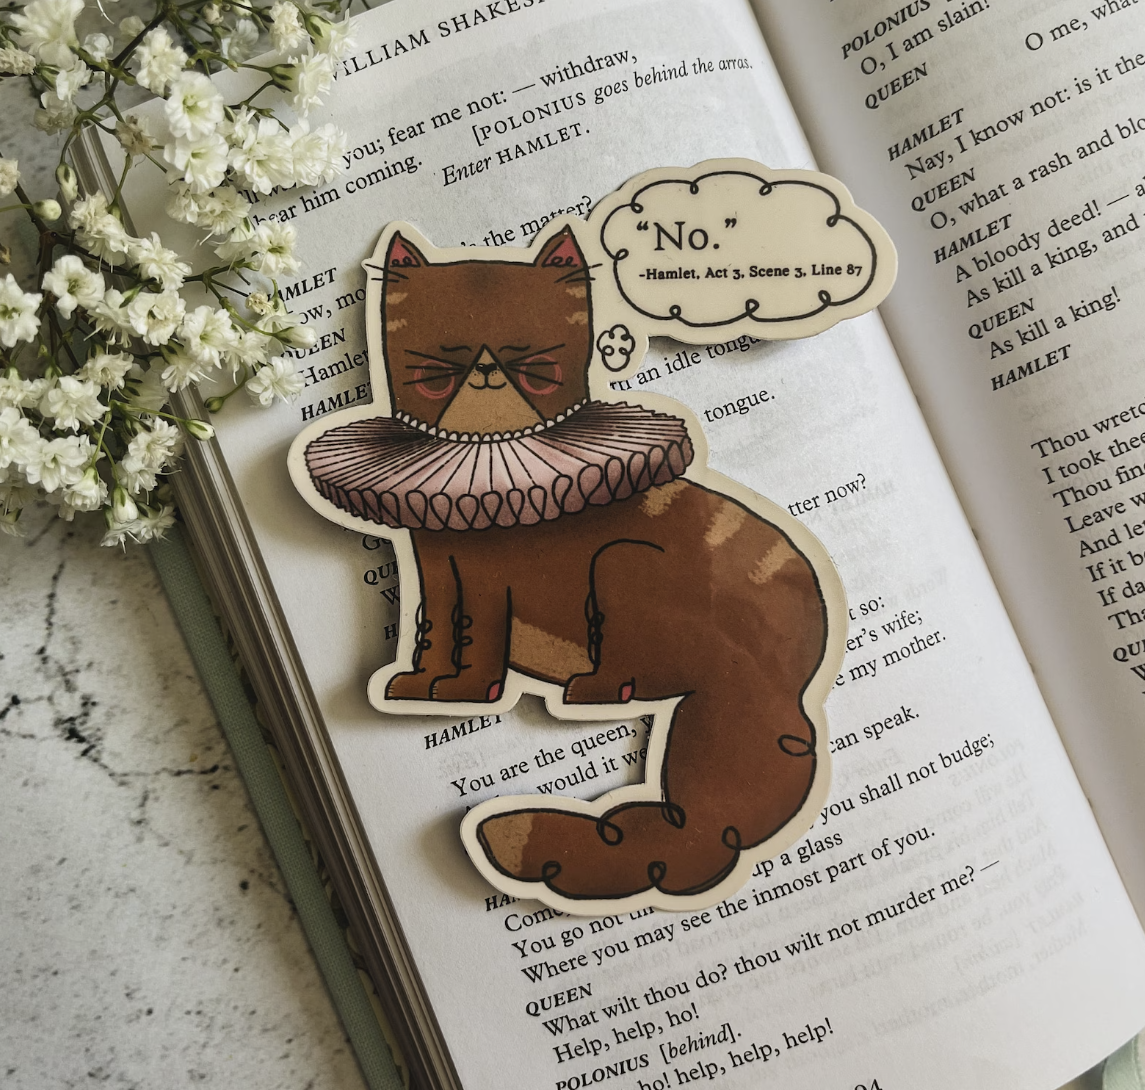 Sticker of a grumpy cat wearing a ruff around it's neck with a speech bubble with a quote from Shakespeare: "No," Hamlet Act 3, Scene 3, Line 87